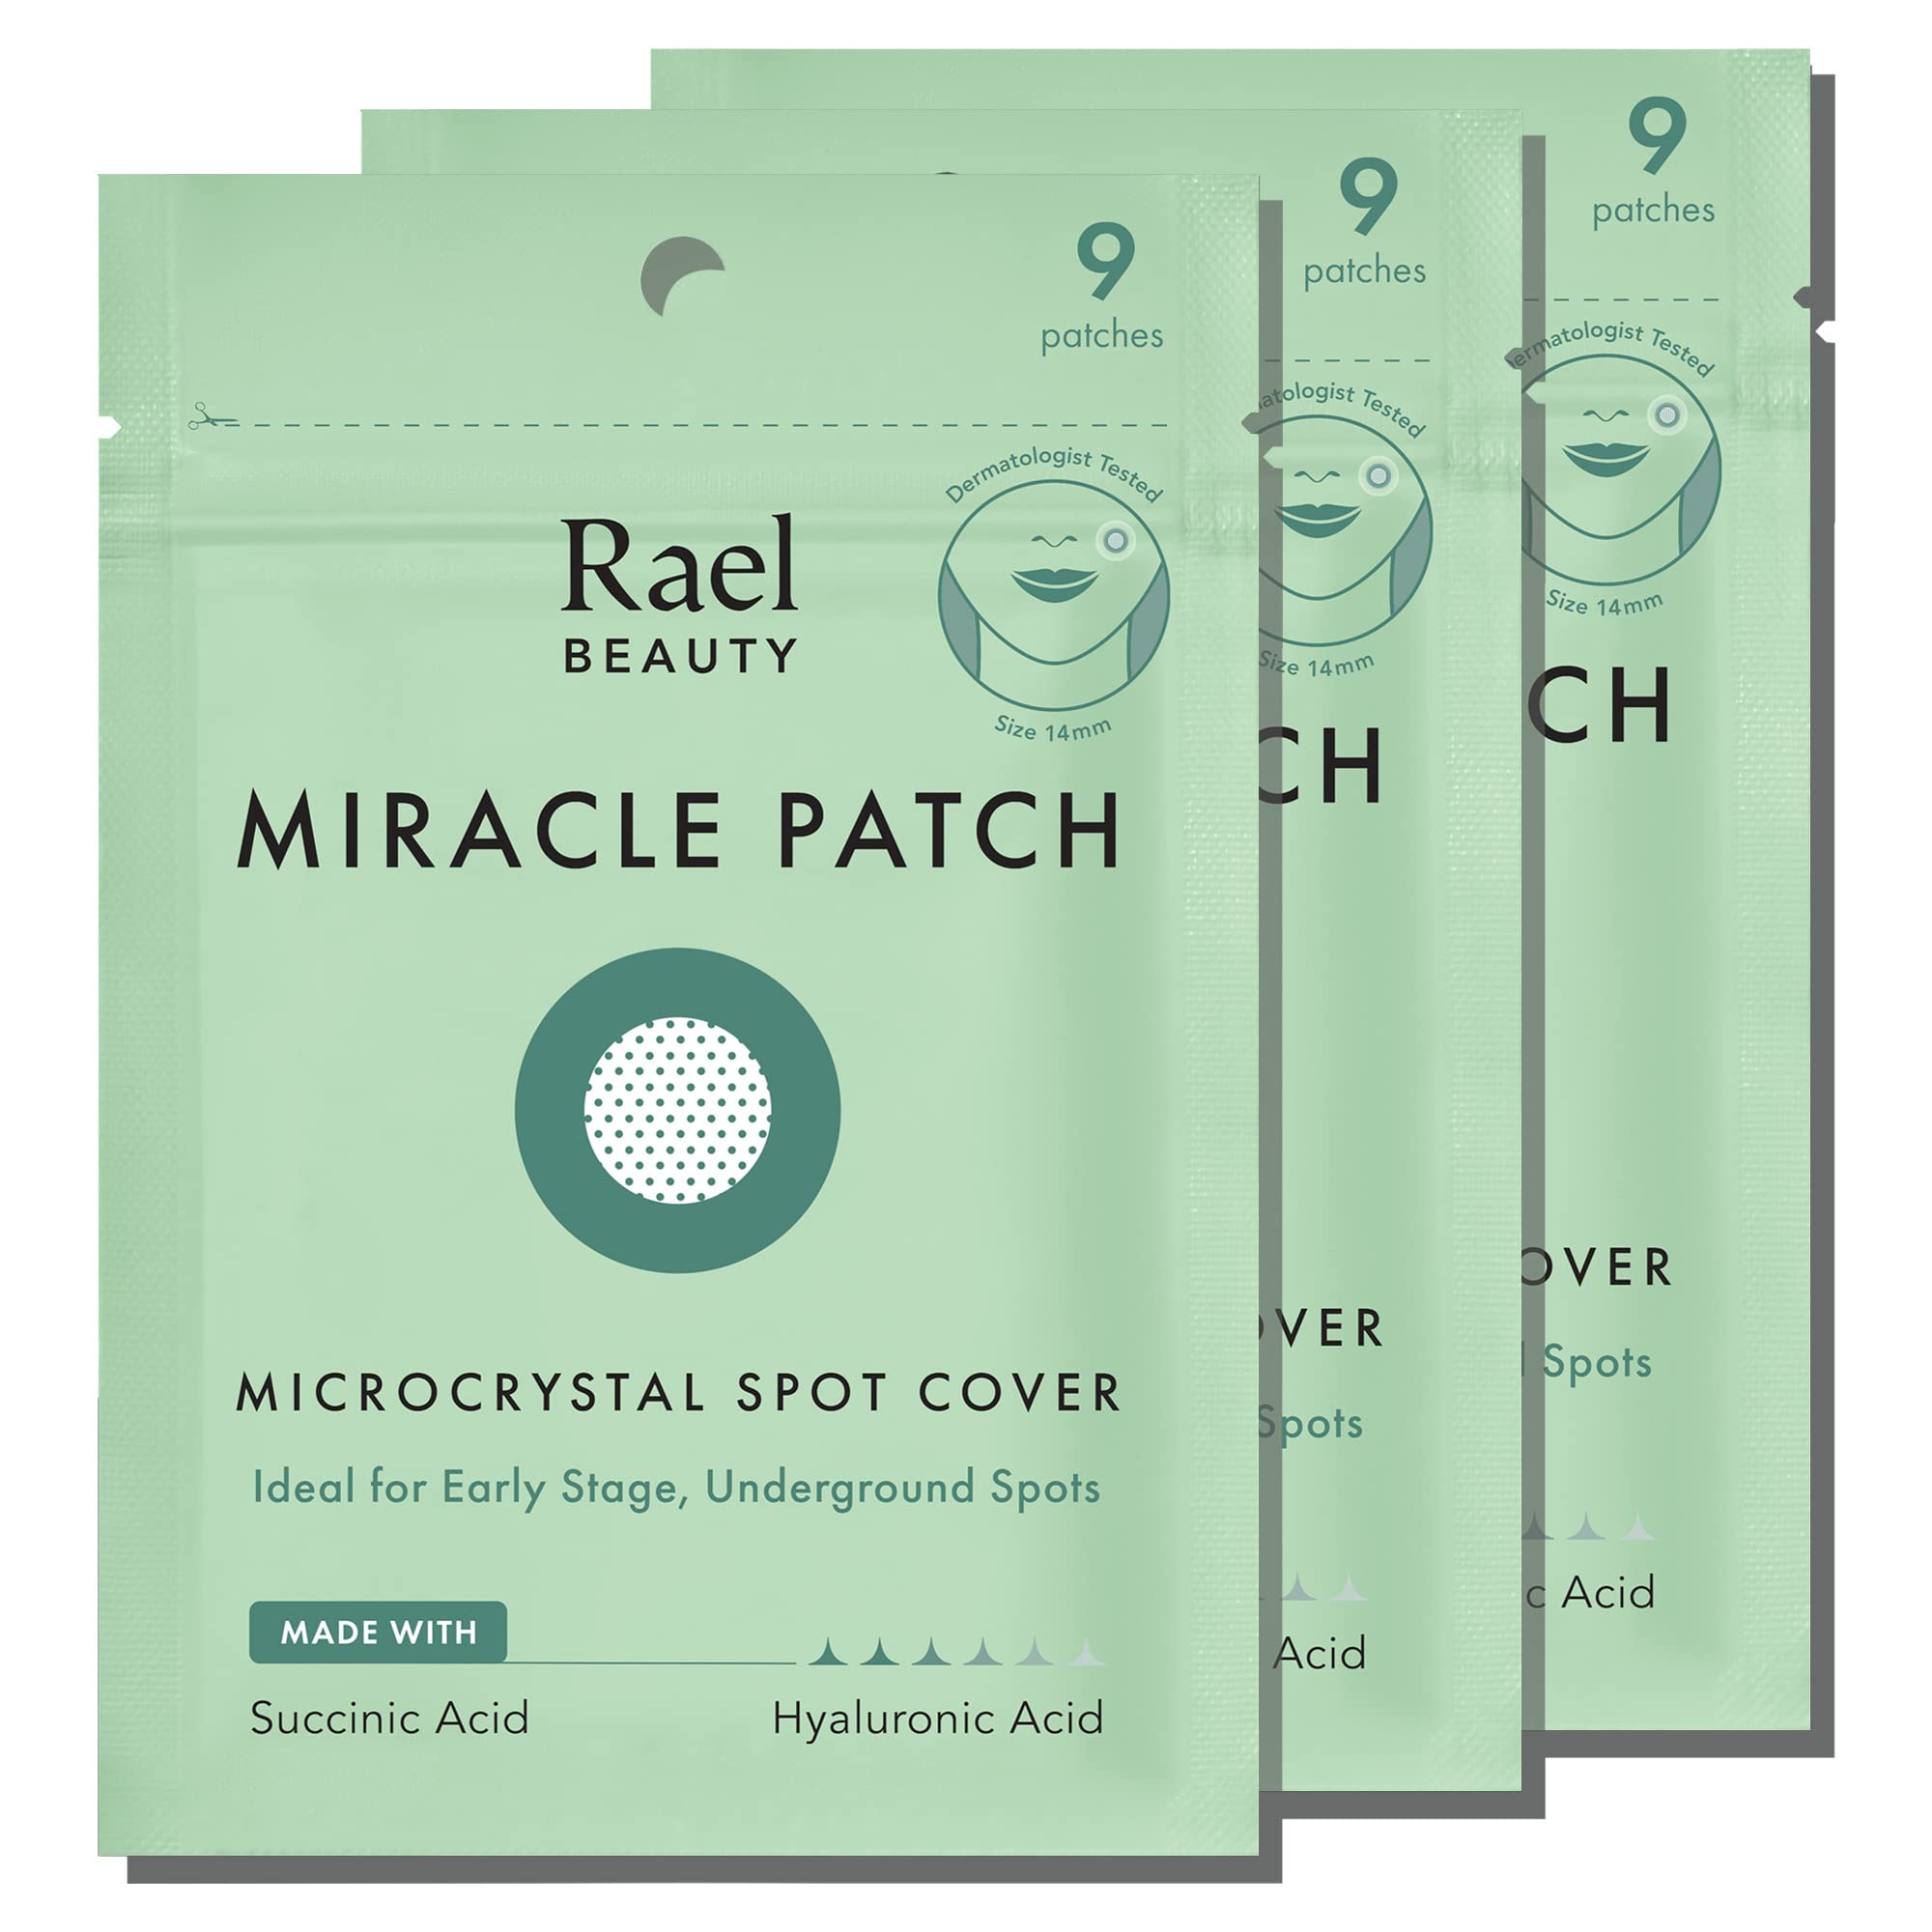 Book Cover Rael Pimple Patches, Miracle Microcrystal Spot Cover - Hydrocolloid Acne Patches for Early Stage, with Tea Tree Oil, for All Skin Types, Vegan, Cruelty Free (27 Count) 9 Count (Pack of 3)